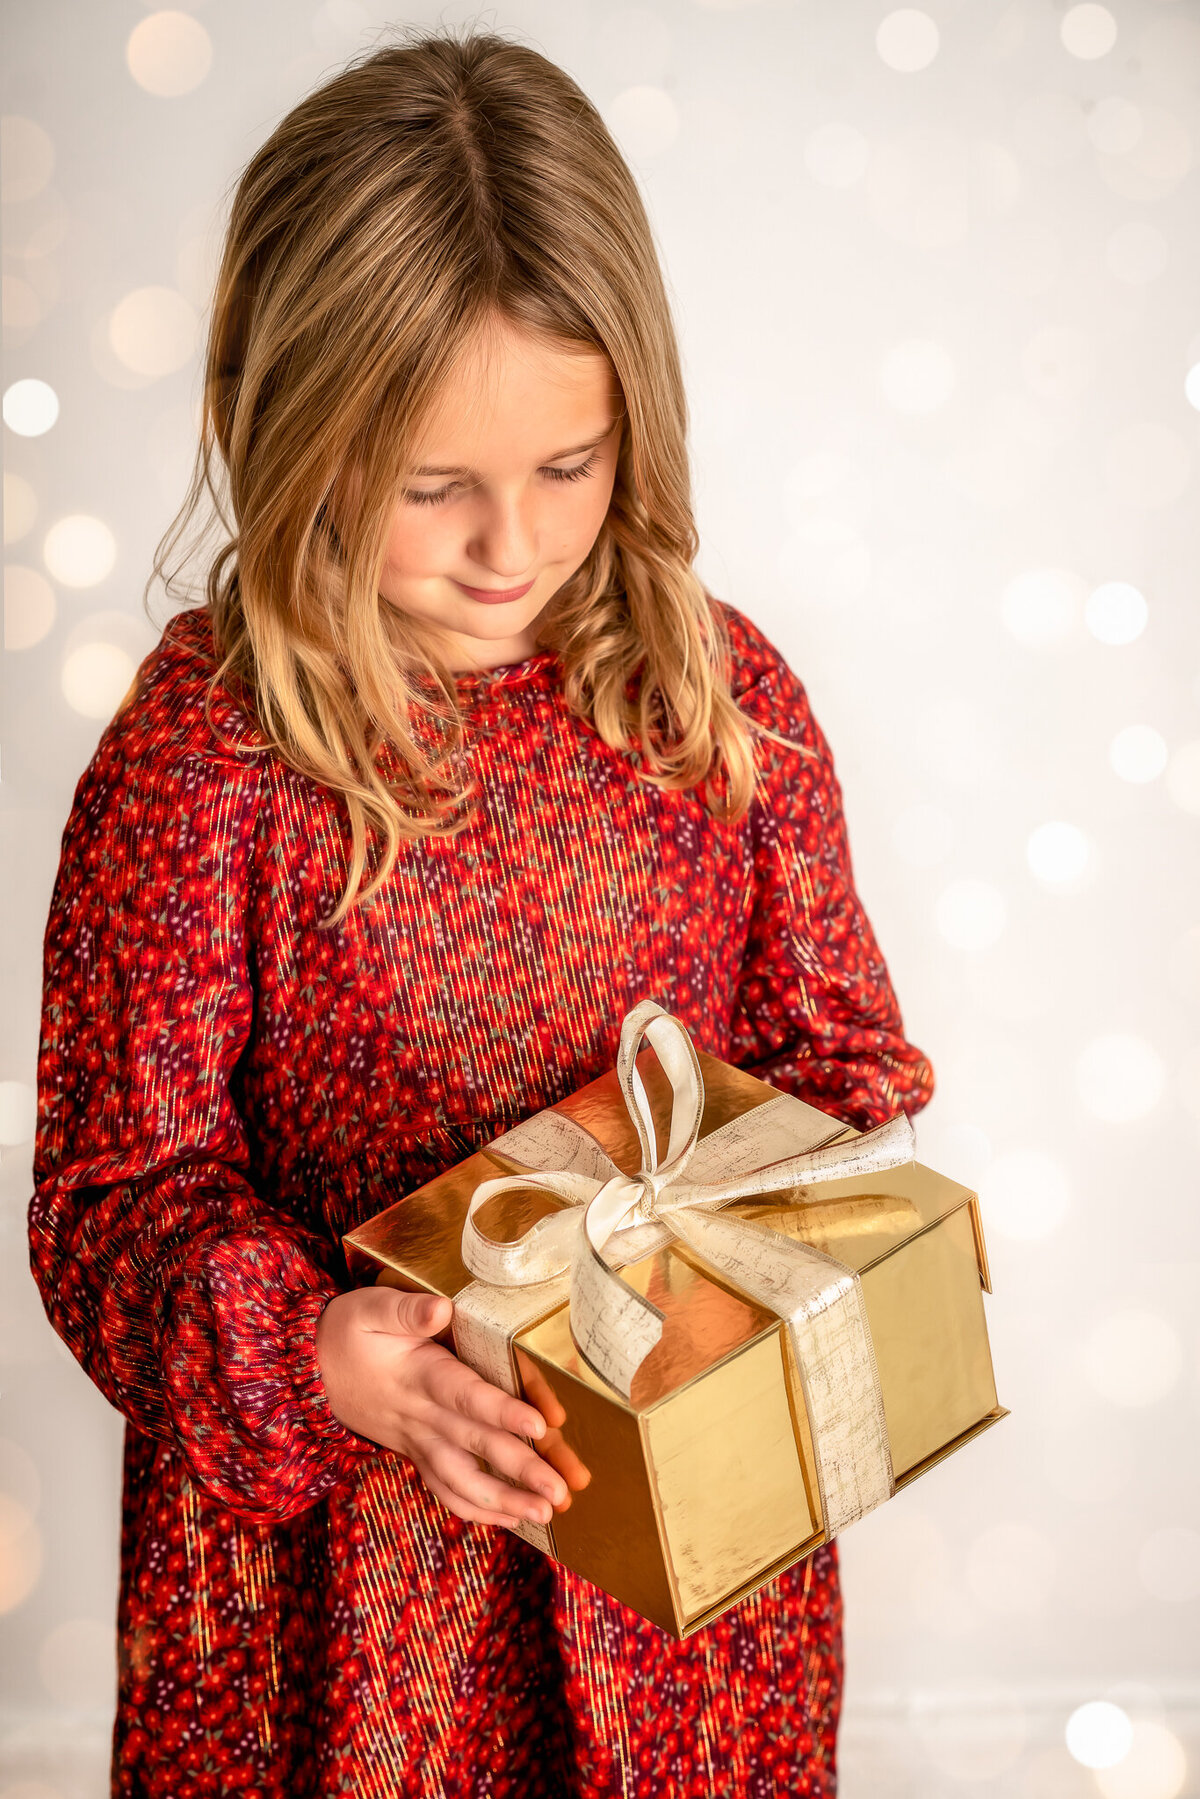 A young child is looking down at a Christmas present with a large gold ribbon.